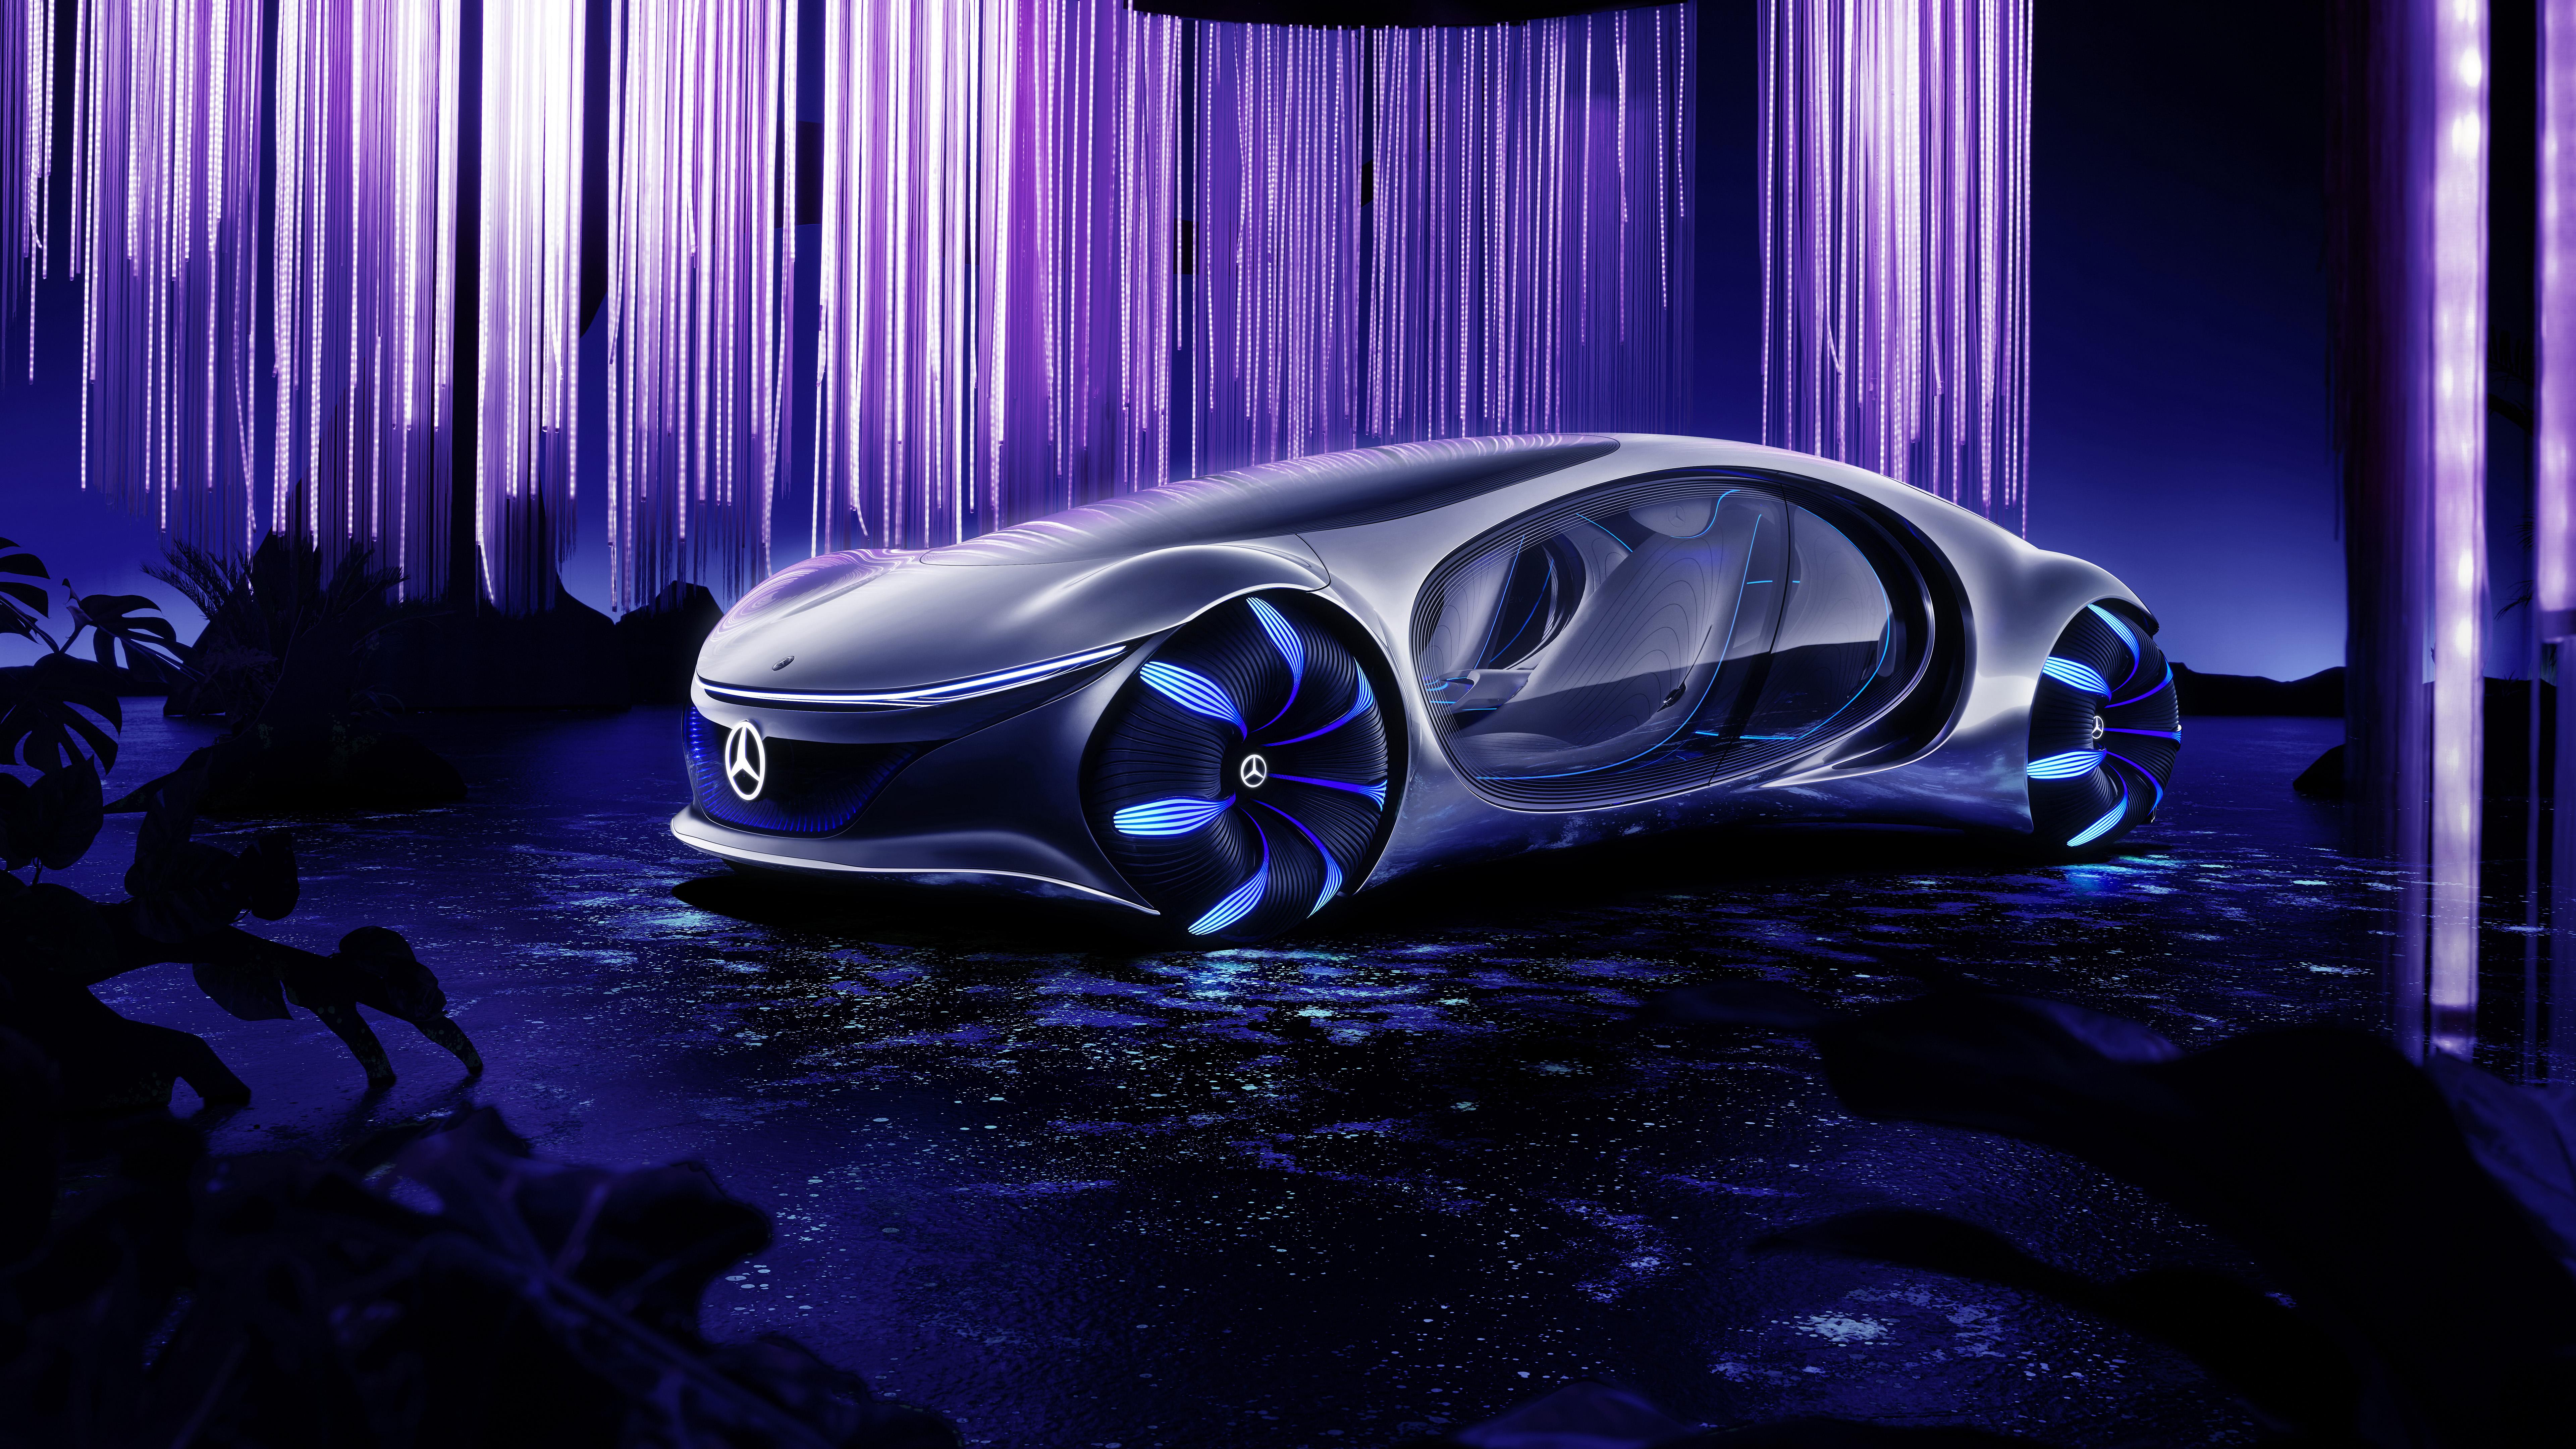 MercedesBenz  Inspired by Avatar we created the VISION AVTR a vehicle  driven by intuition With its bionic design it resembles a living organism  which is in harmony with nature Avatar mb4meAVTRxGW 